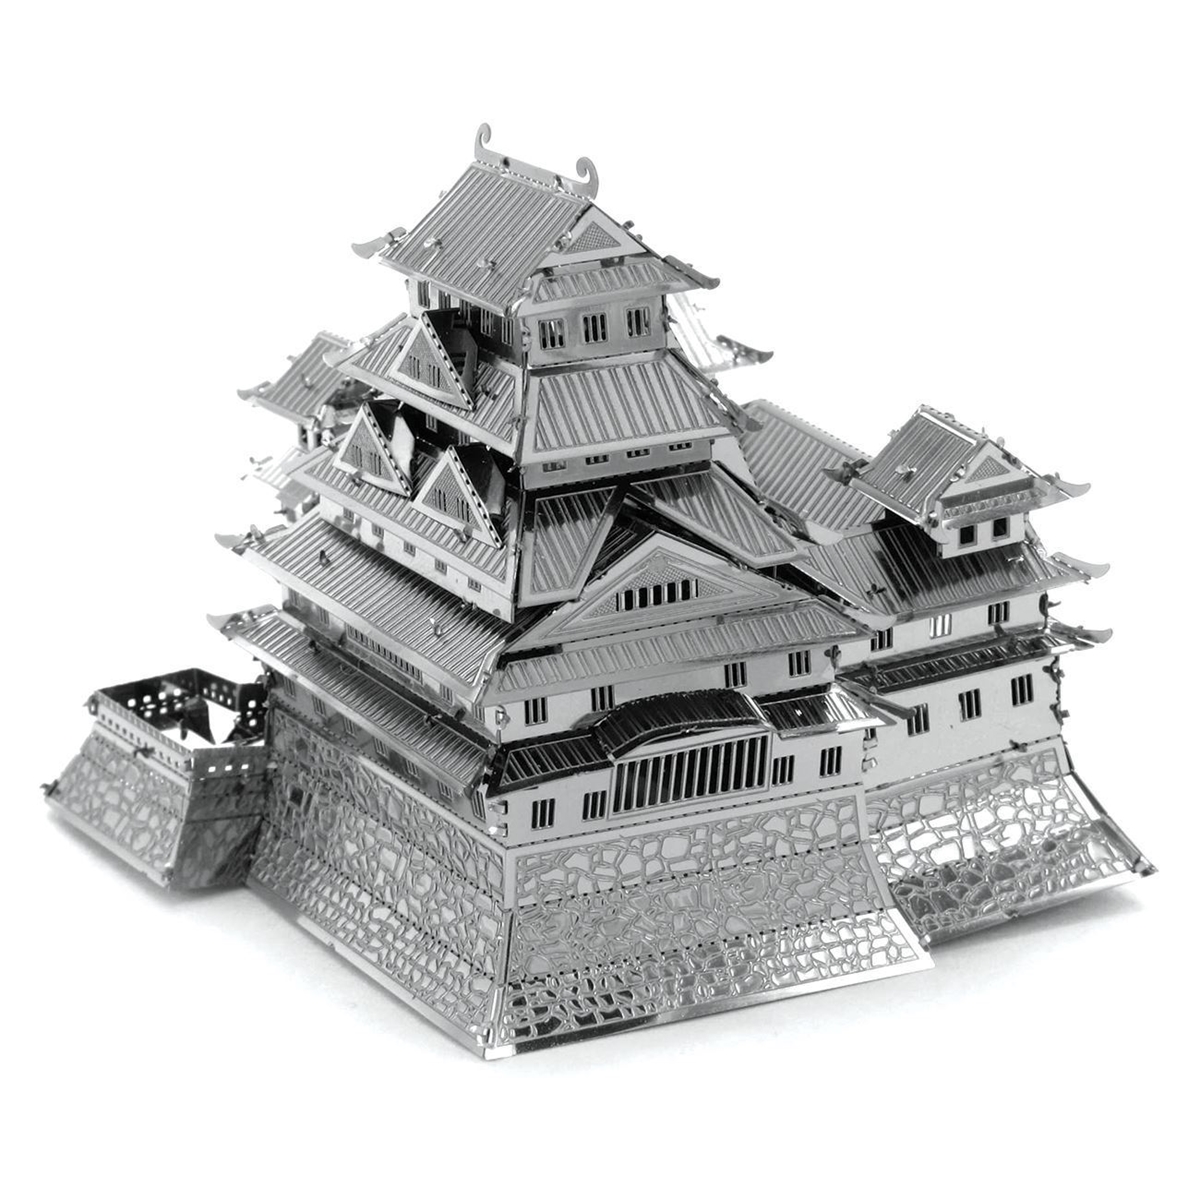 himeji castle forge of empires points